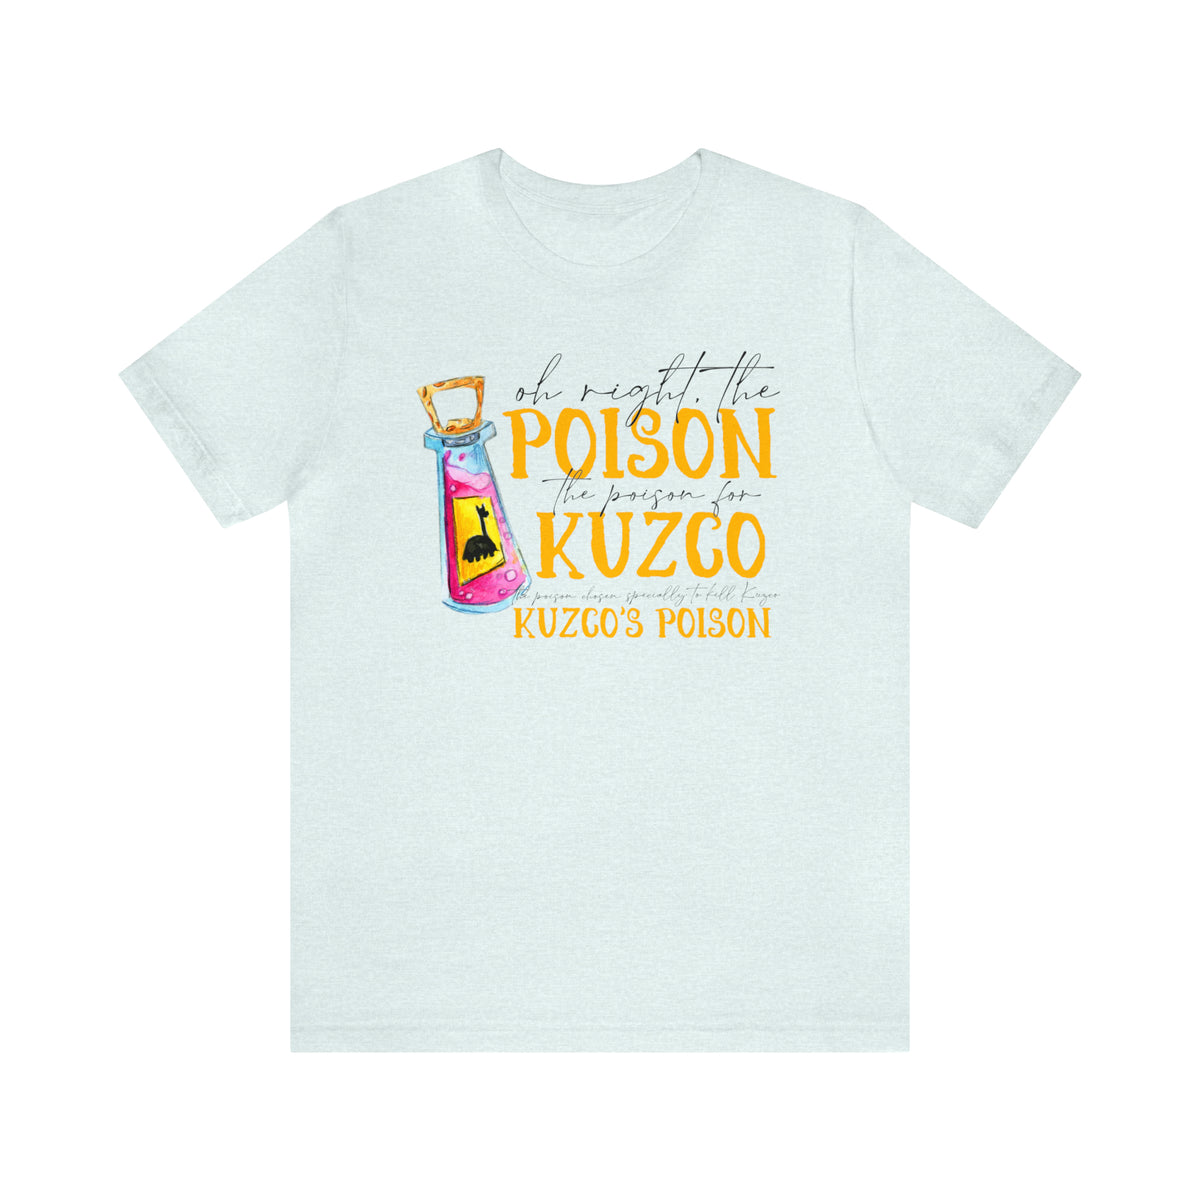 Oh Right The Poison Bella Canvas Unisex Jersey Short Sleeve Tee